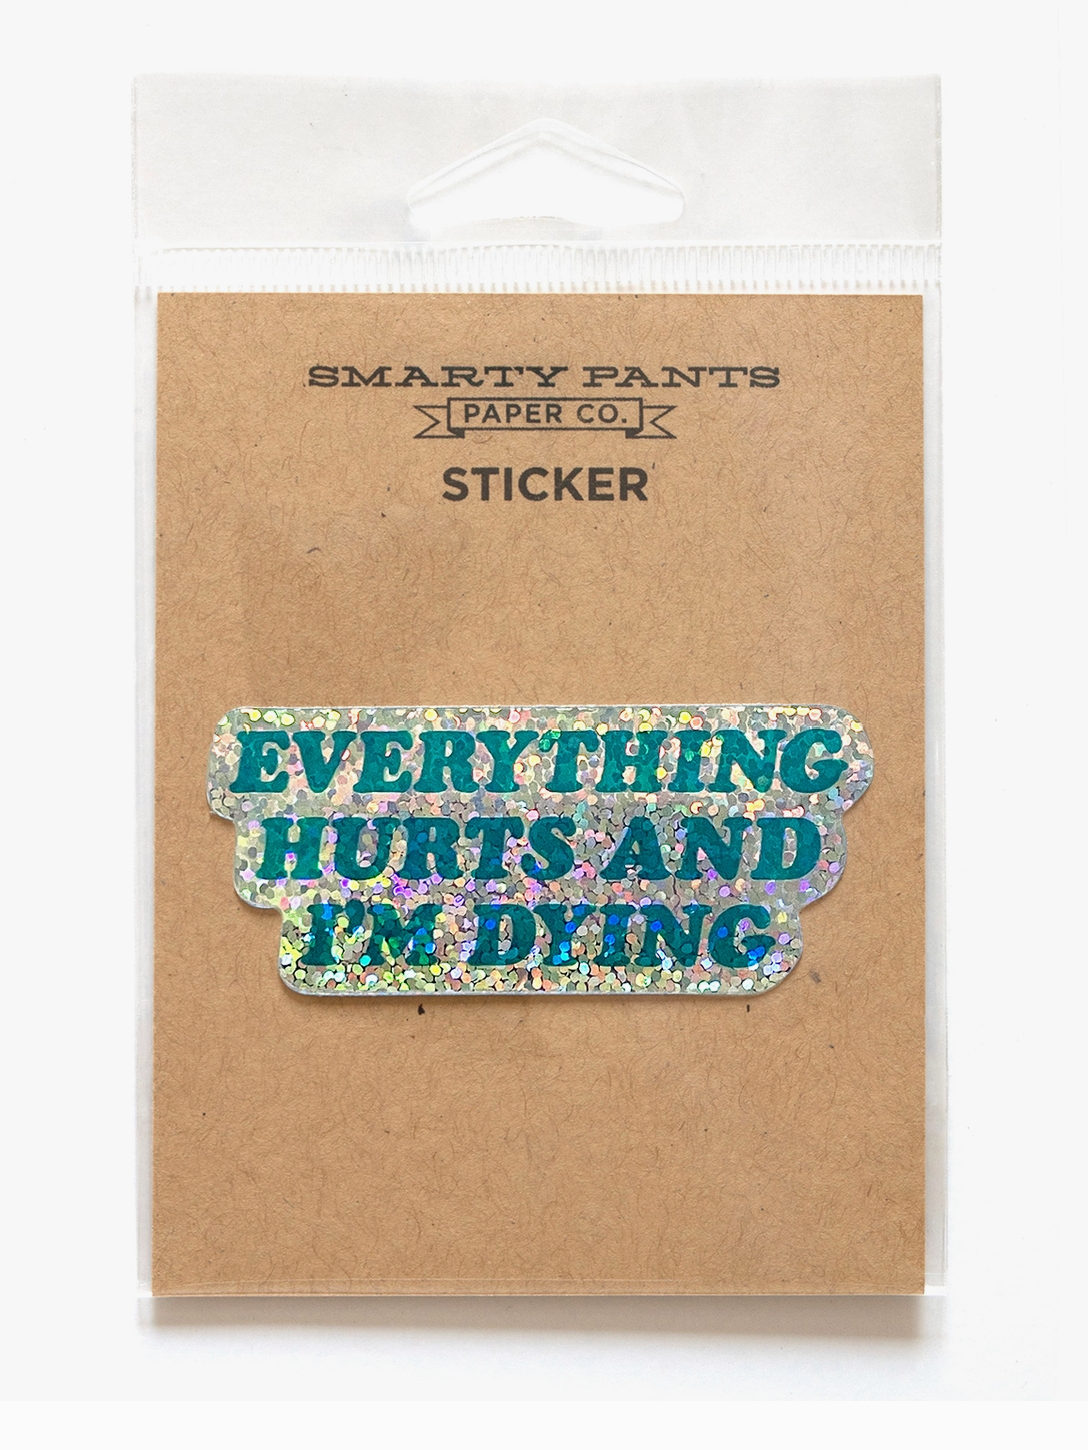 Smarty Pants Paper co. Everything Hurts Sticker